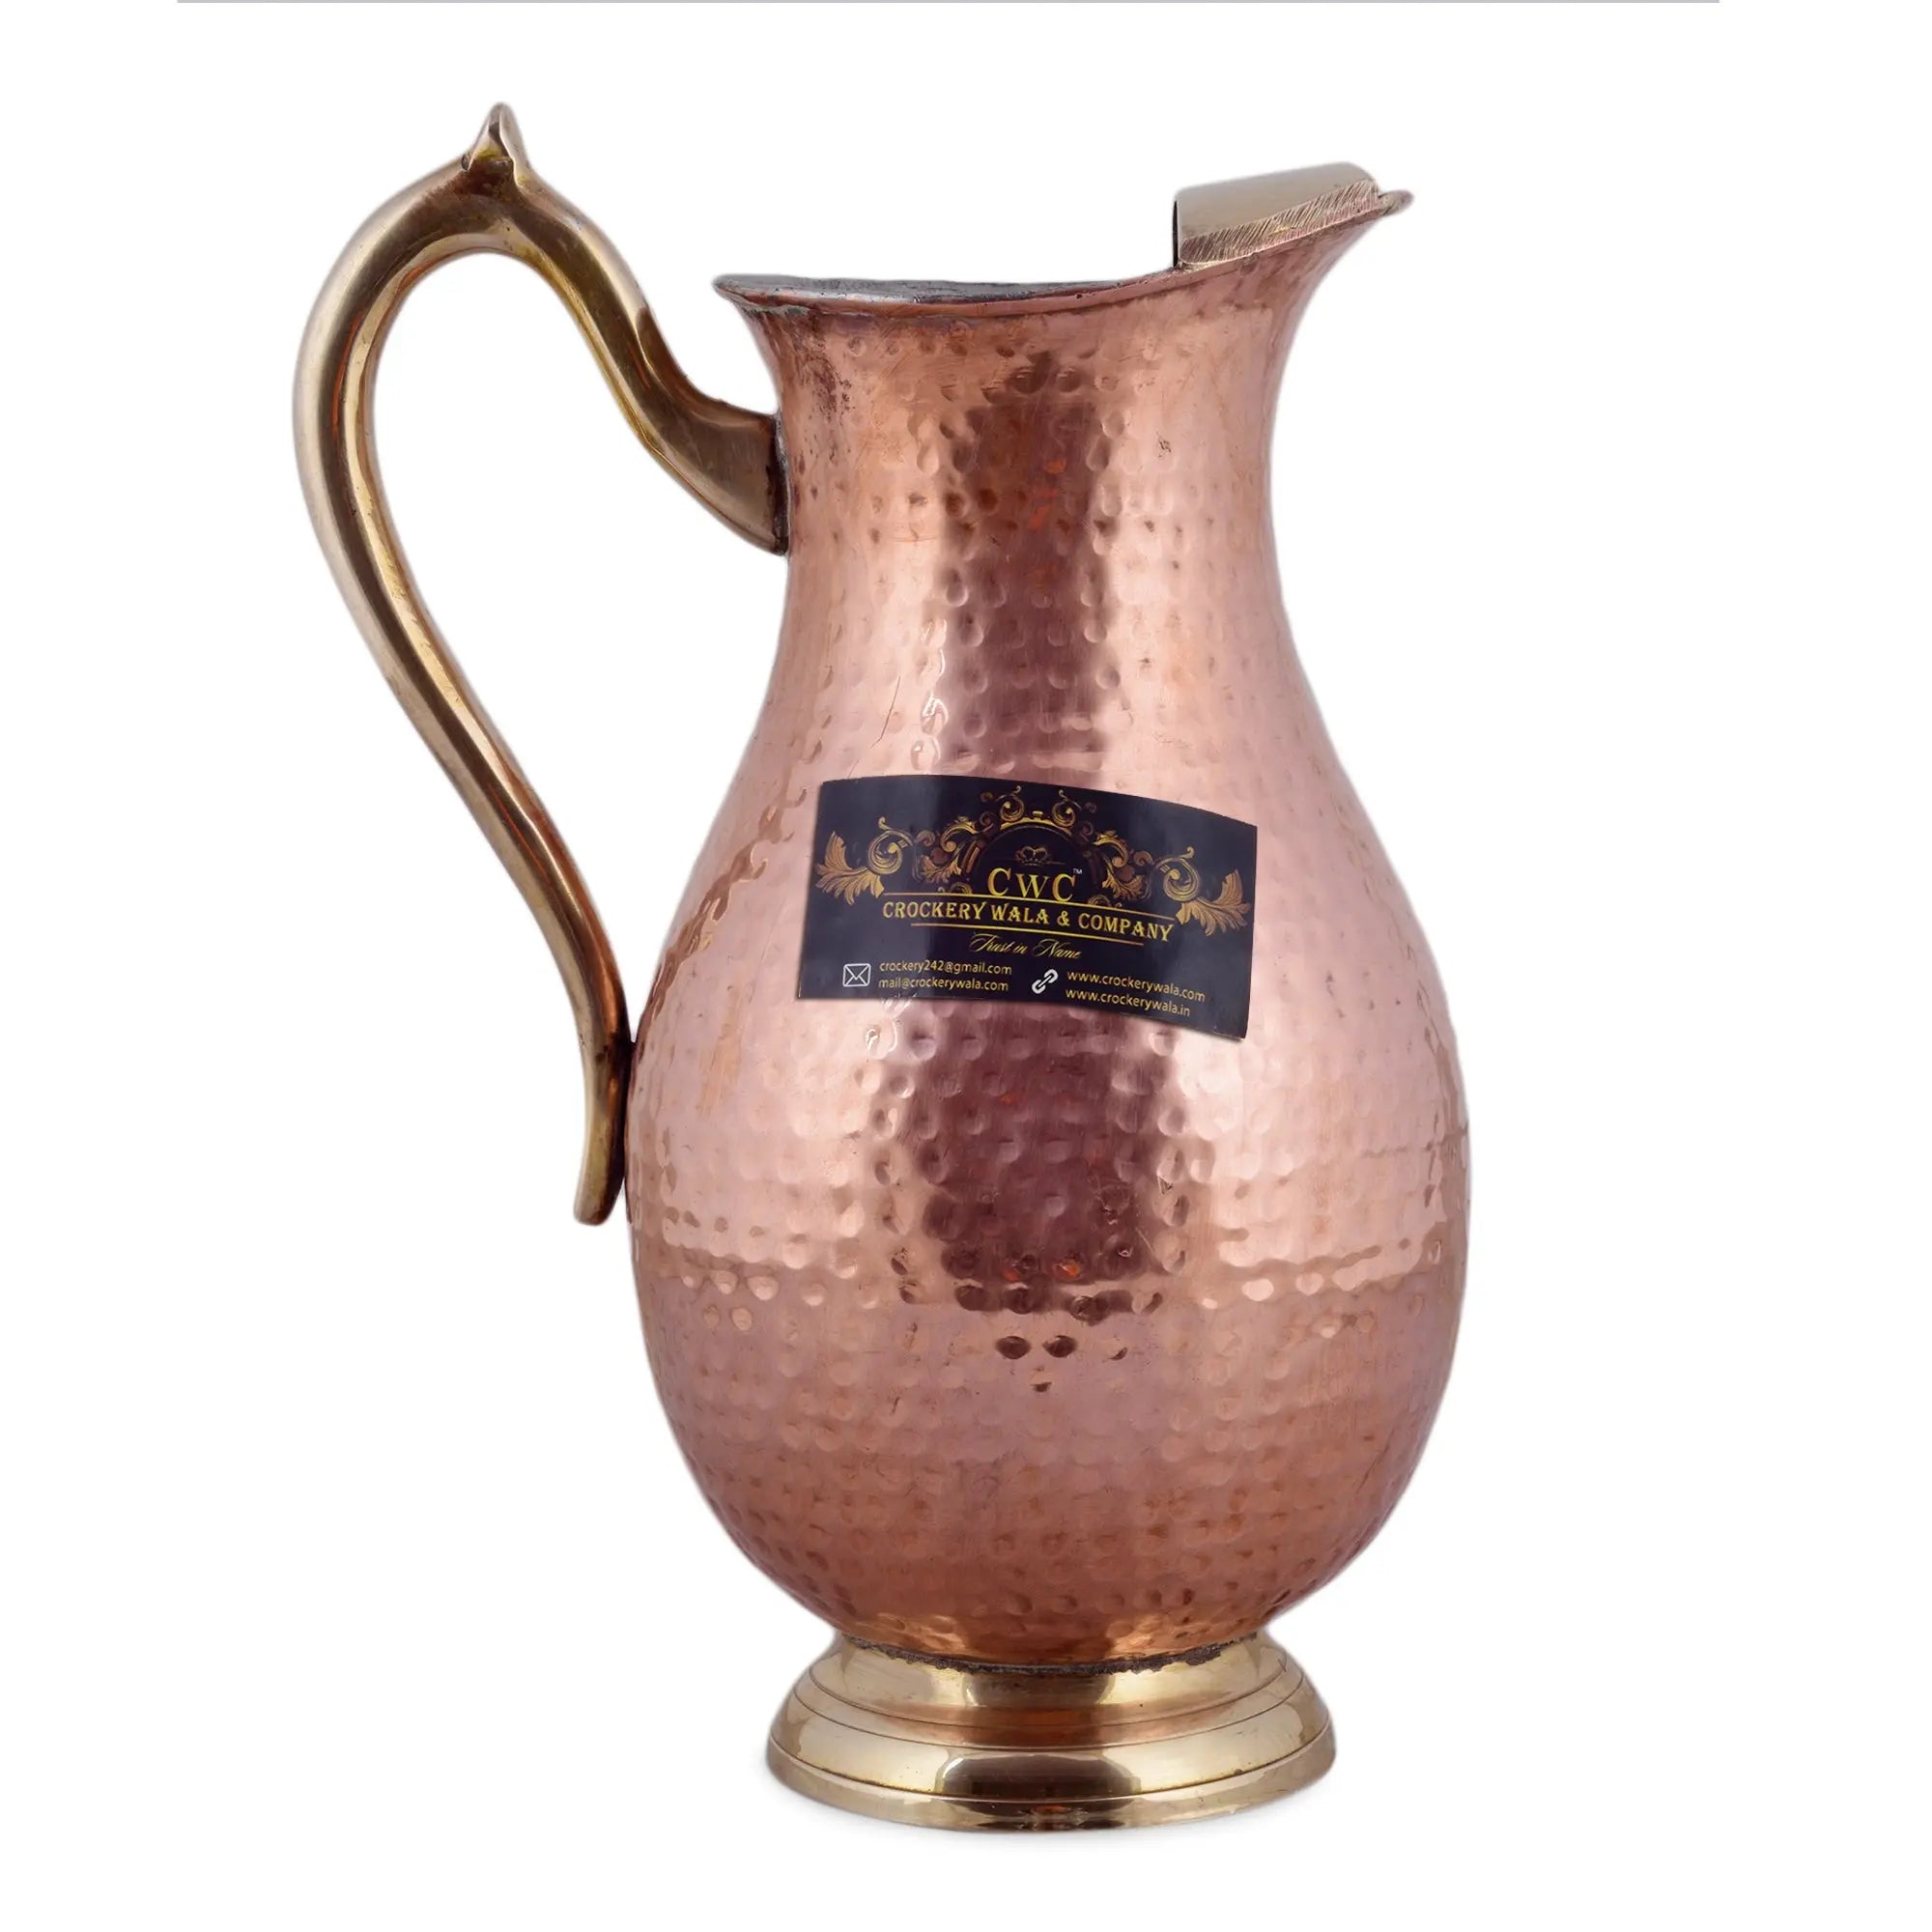 Copper Mughal Jug With Inside Tinning With Brass Handle For Gifting - CROCKERY WALA AND COMPANY 